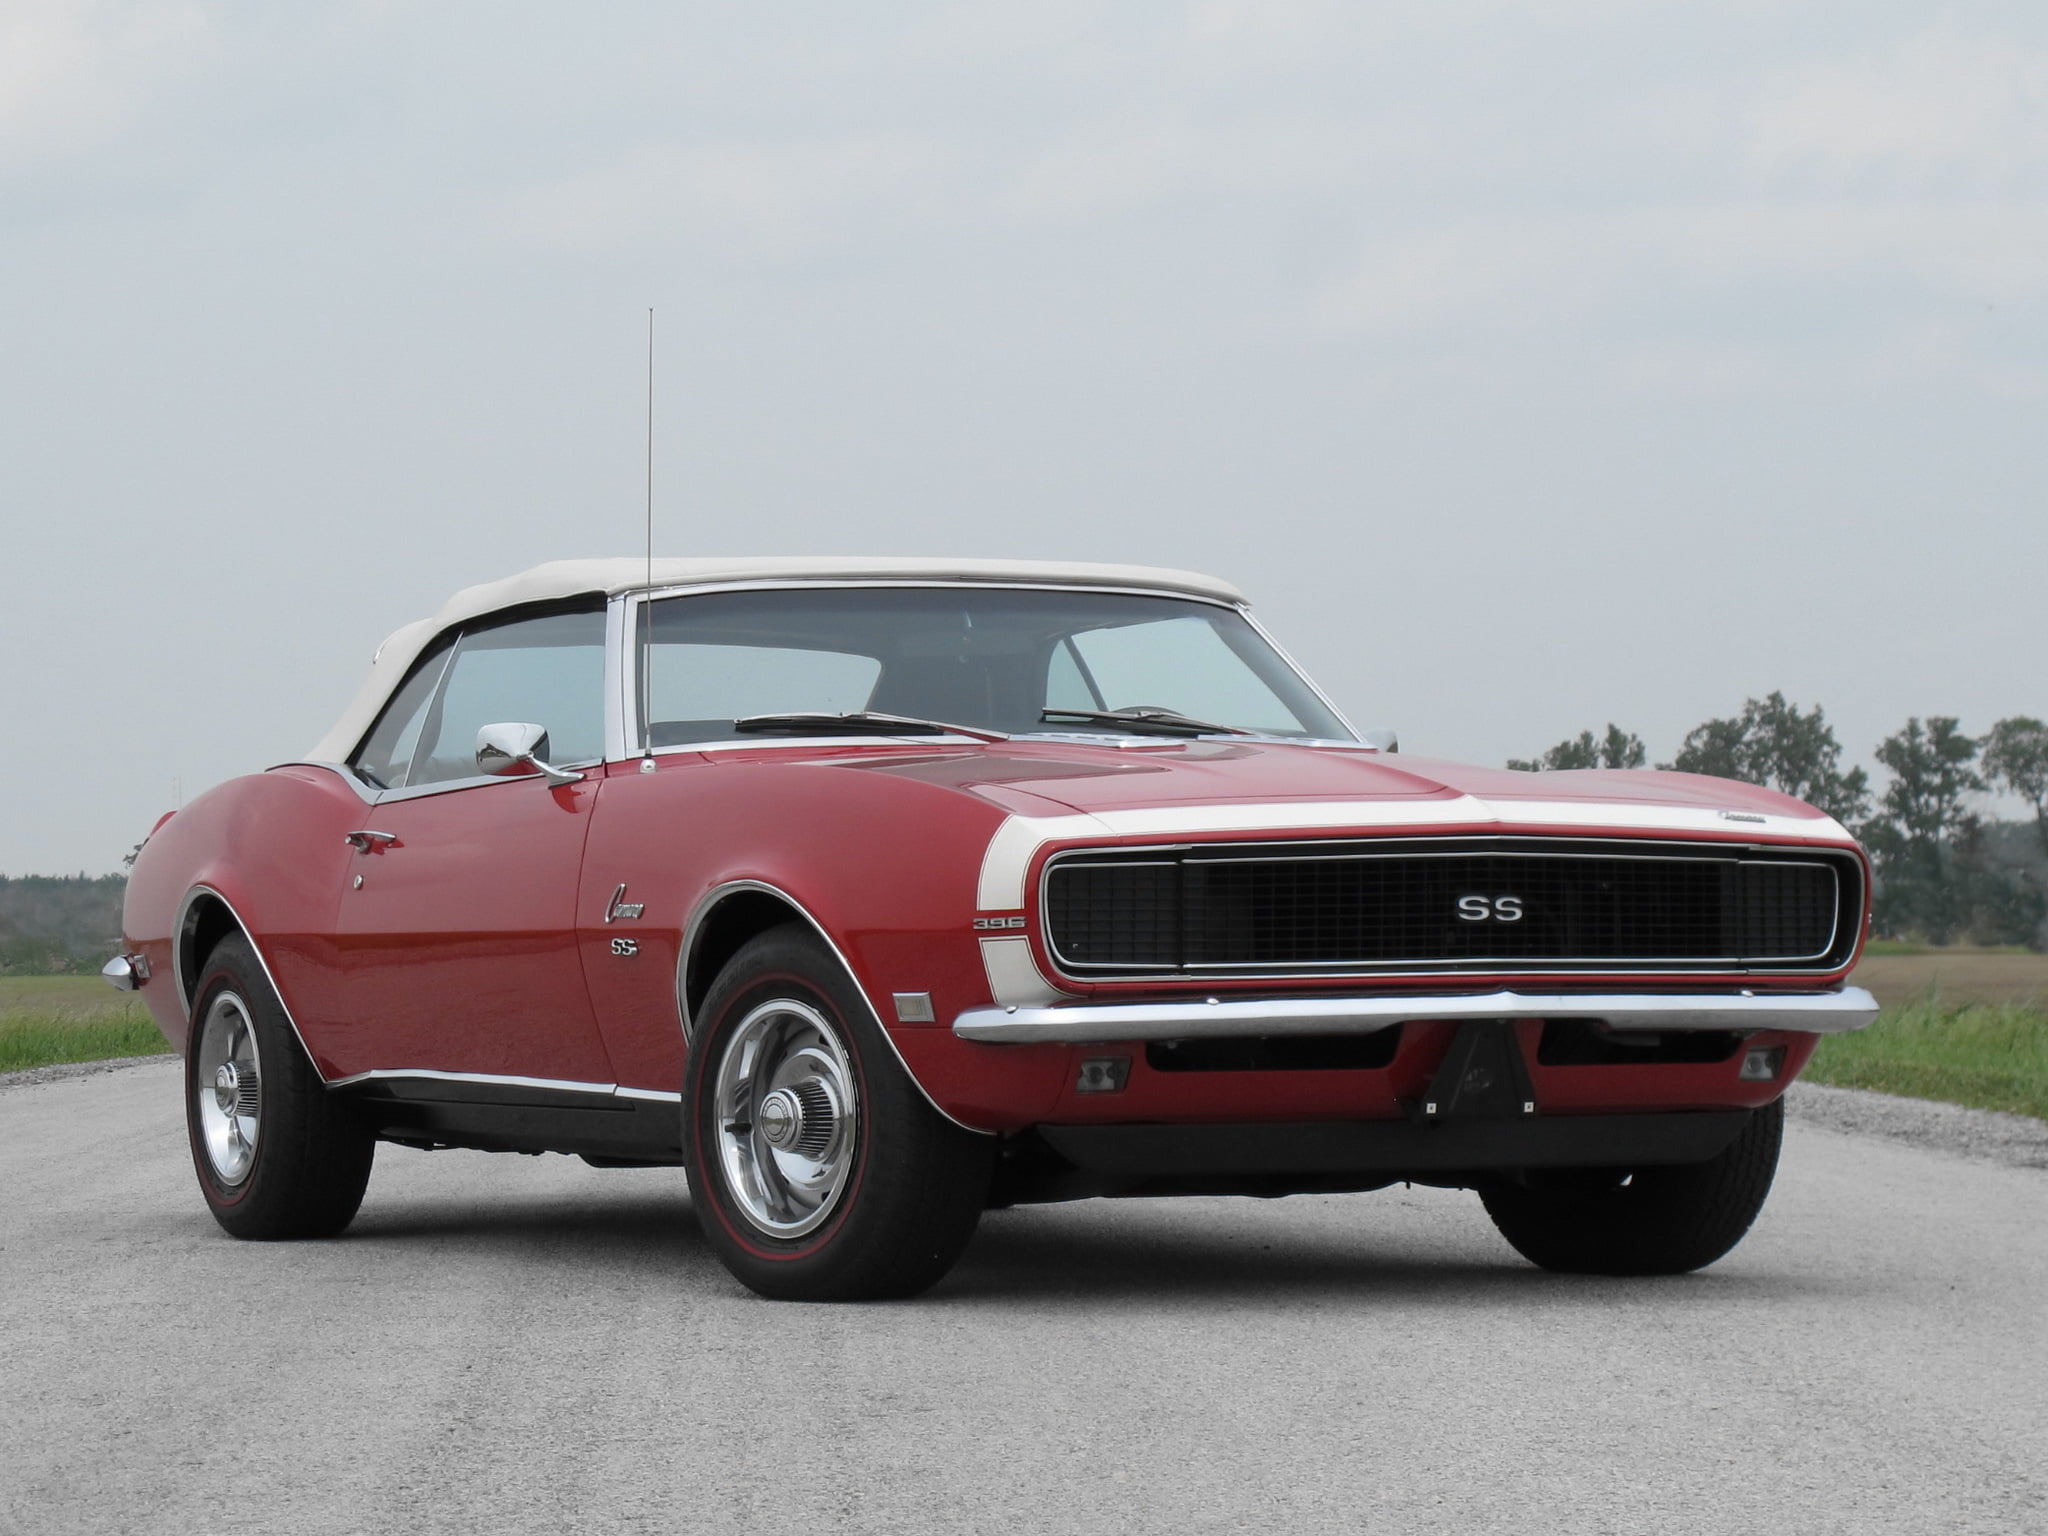 red muscle car, convertible, Chevrolet, 1968, Camaro, 396, Chevy